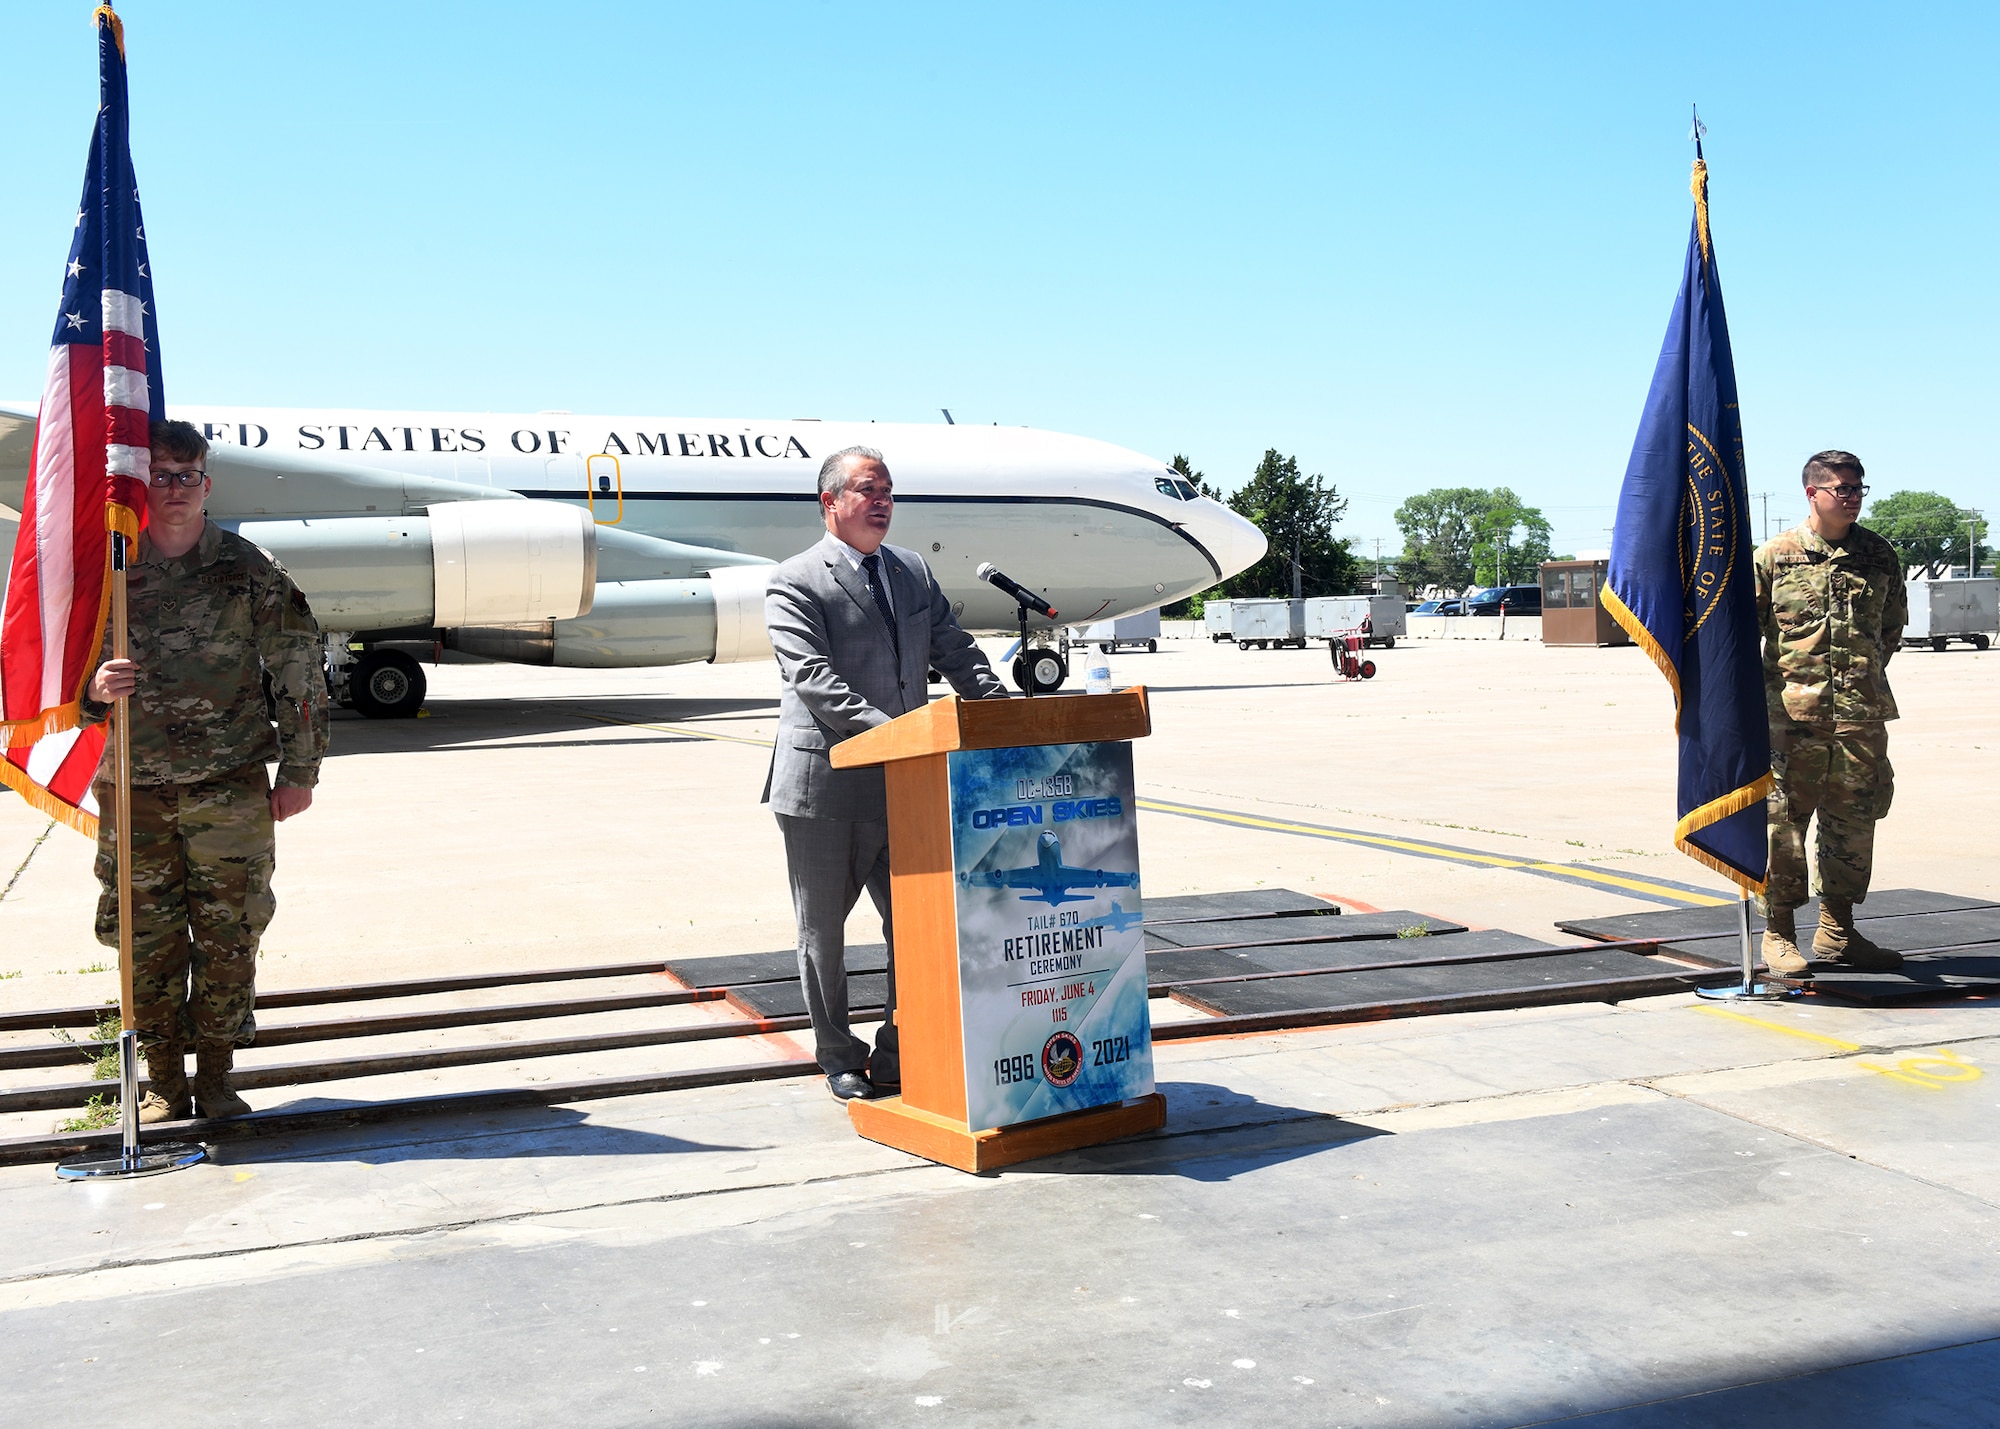 Man gives speech at a podium outside. An Airmen holding a flag stands on each side of the podium and the retiring OC-135 aircraft is in the background.